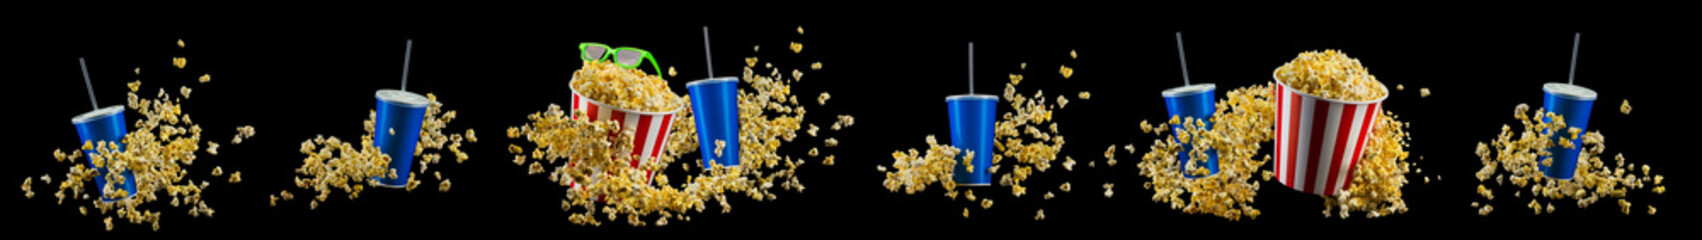 Blue cup with cap and flying popcorn isolated on black background